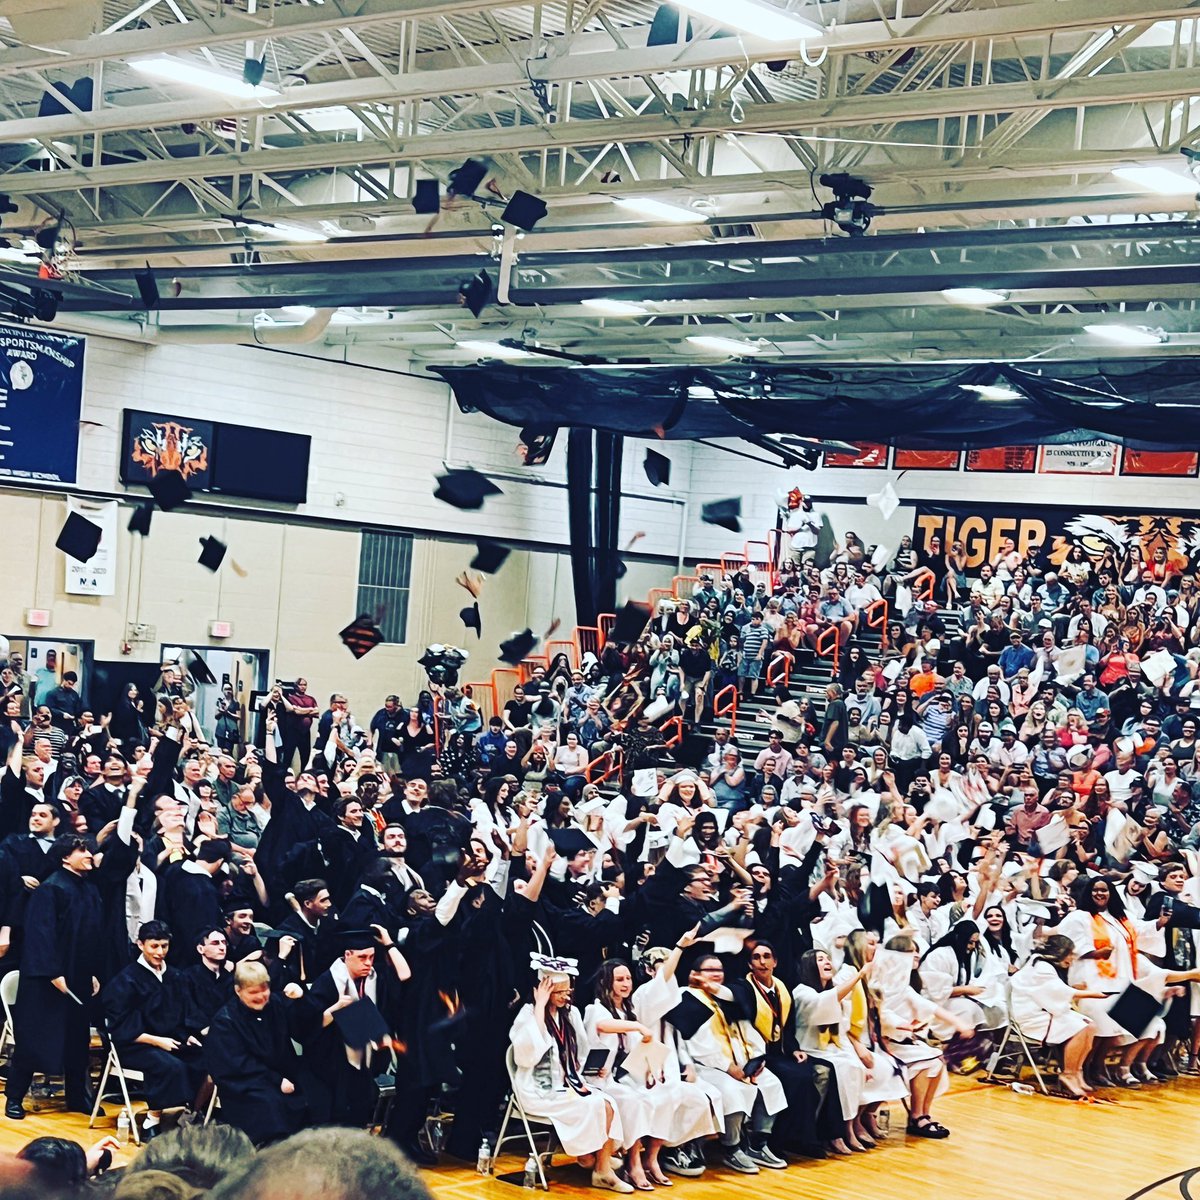 Congrats Class of 2023, you did it! Special shout out to our fab 5: KK, Ella, Devin, Cece and Sarah. We LOVE you girls and are so proud of you!🎓🧡🖤 #tigerstrong